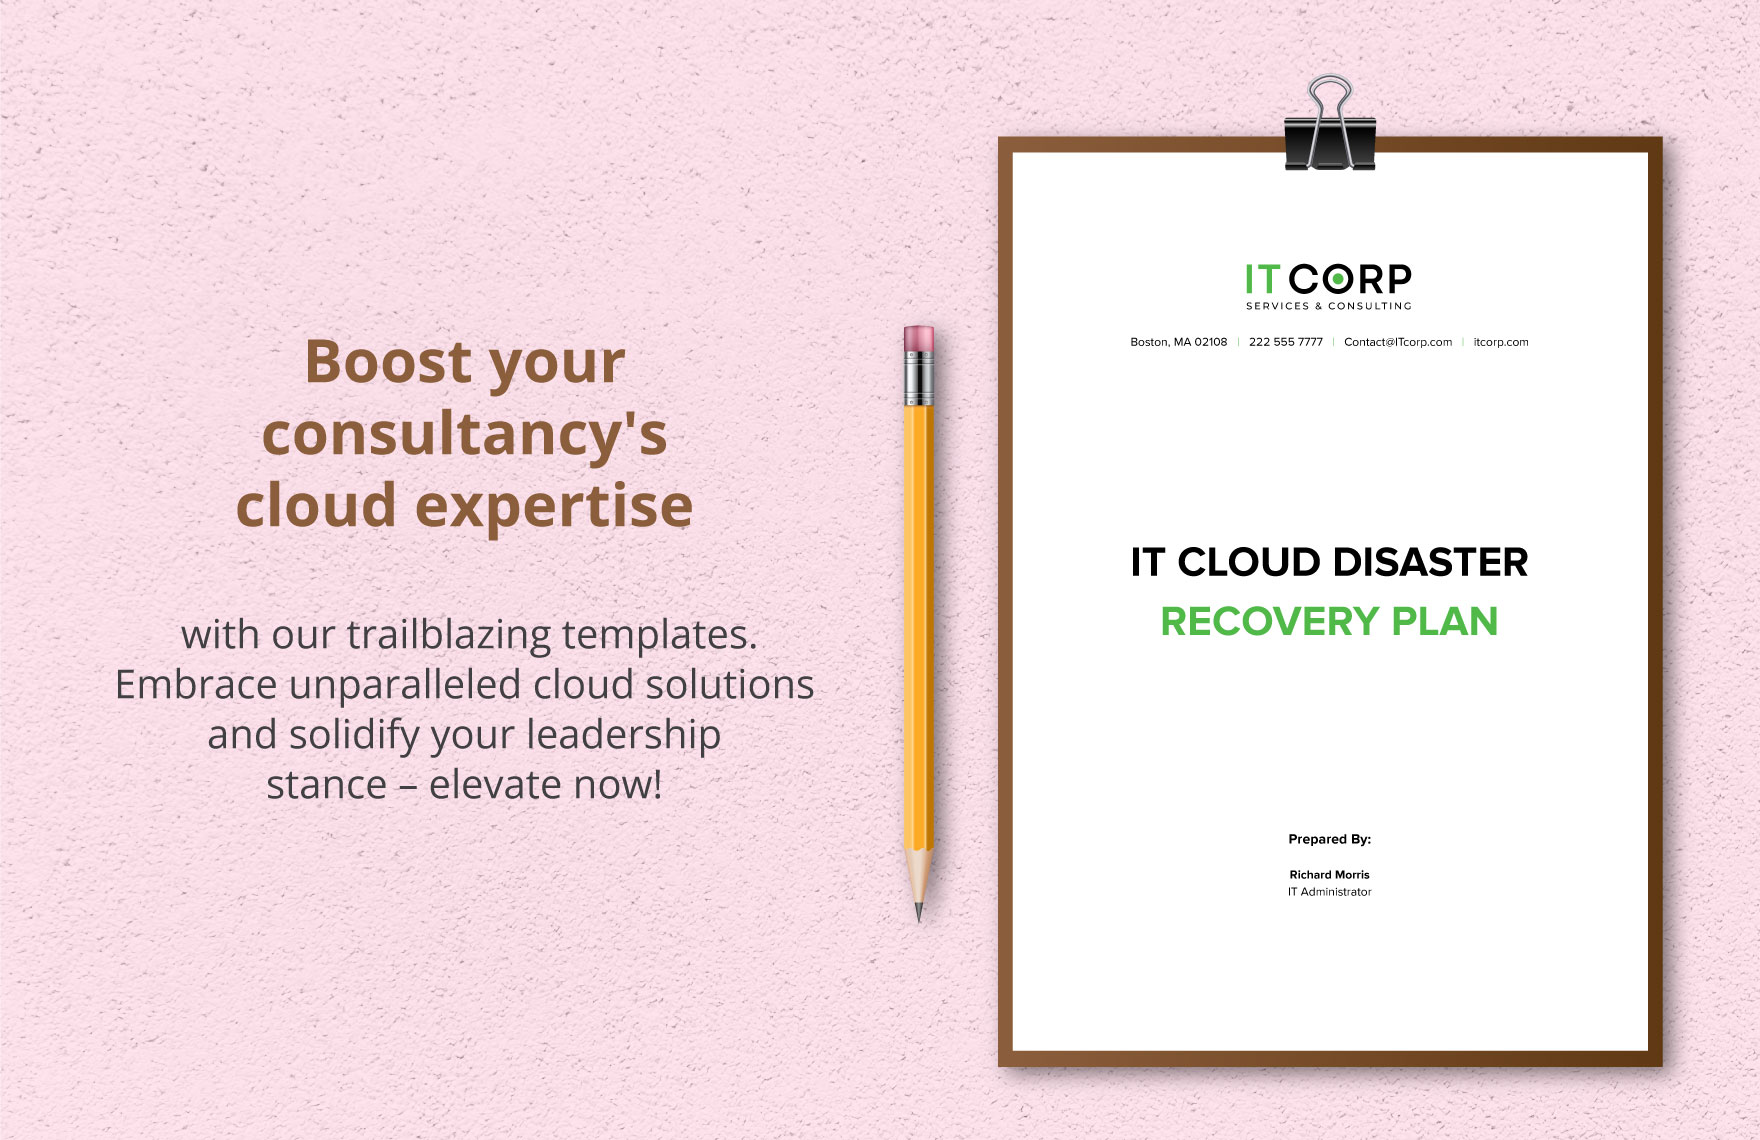 IT Cloud Disaster Recovery Plan Template